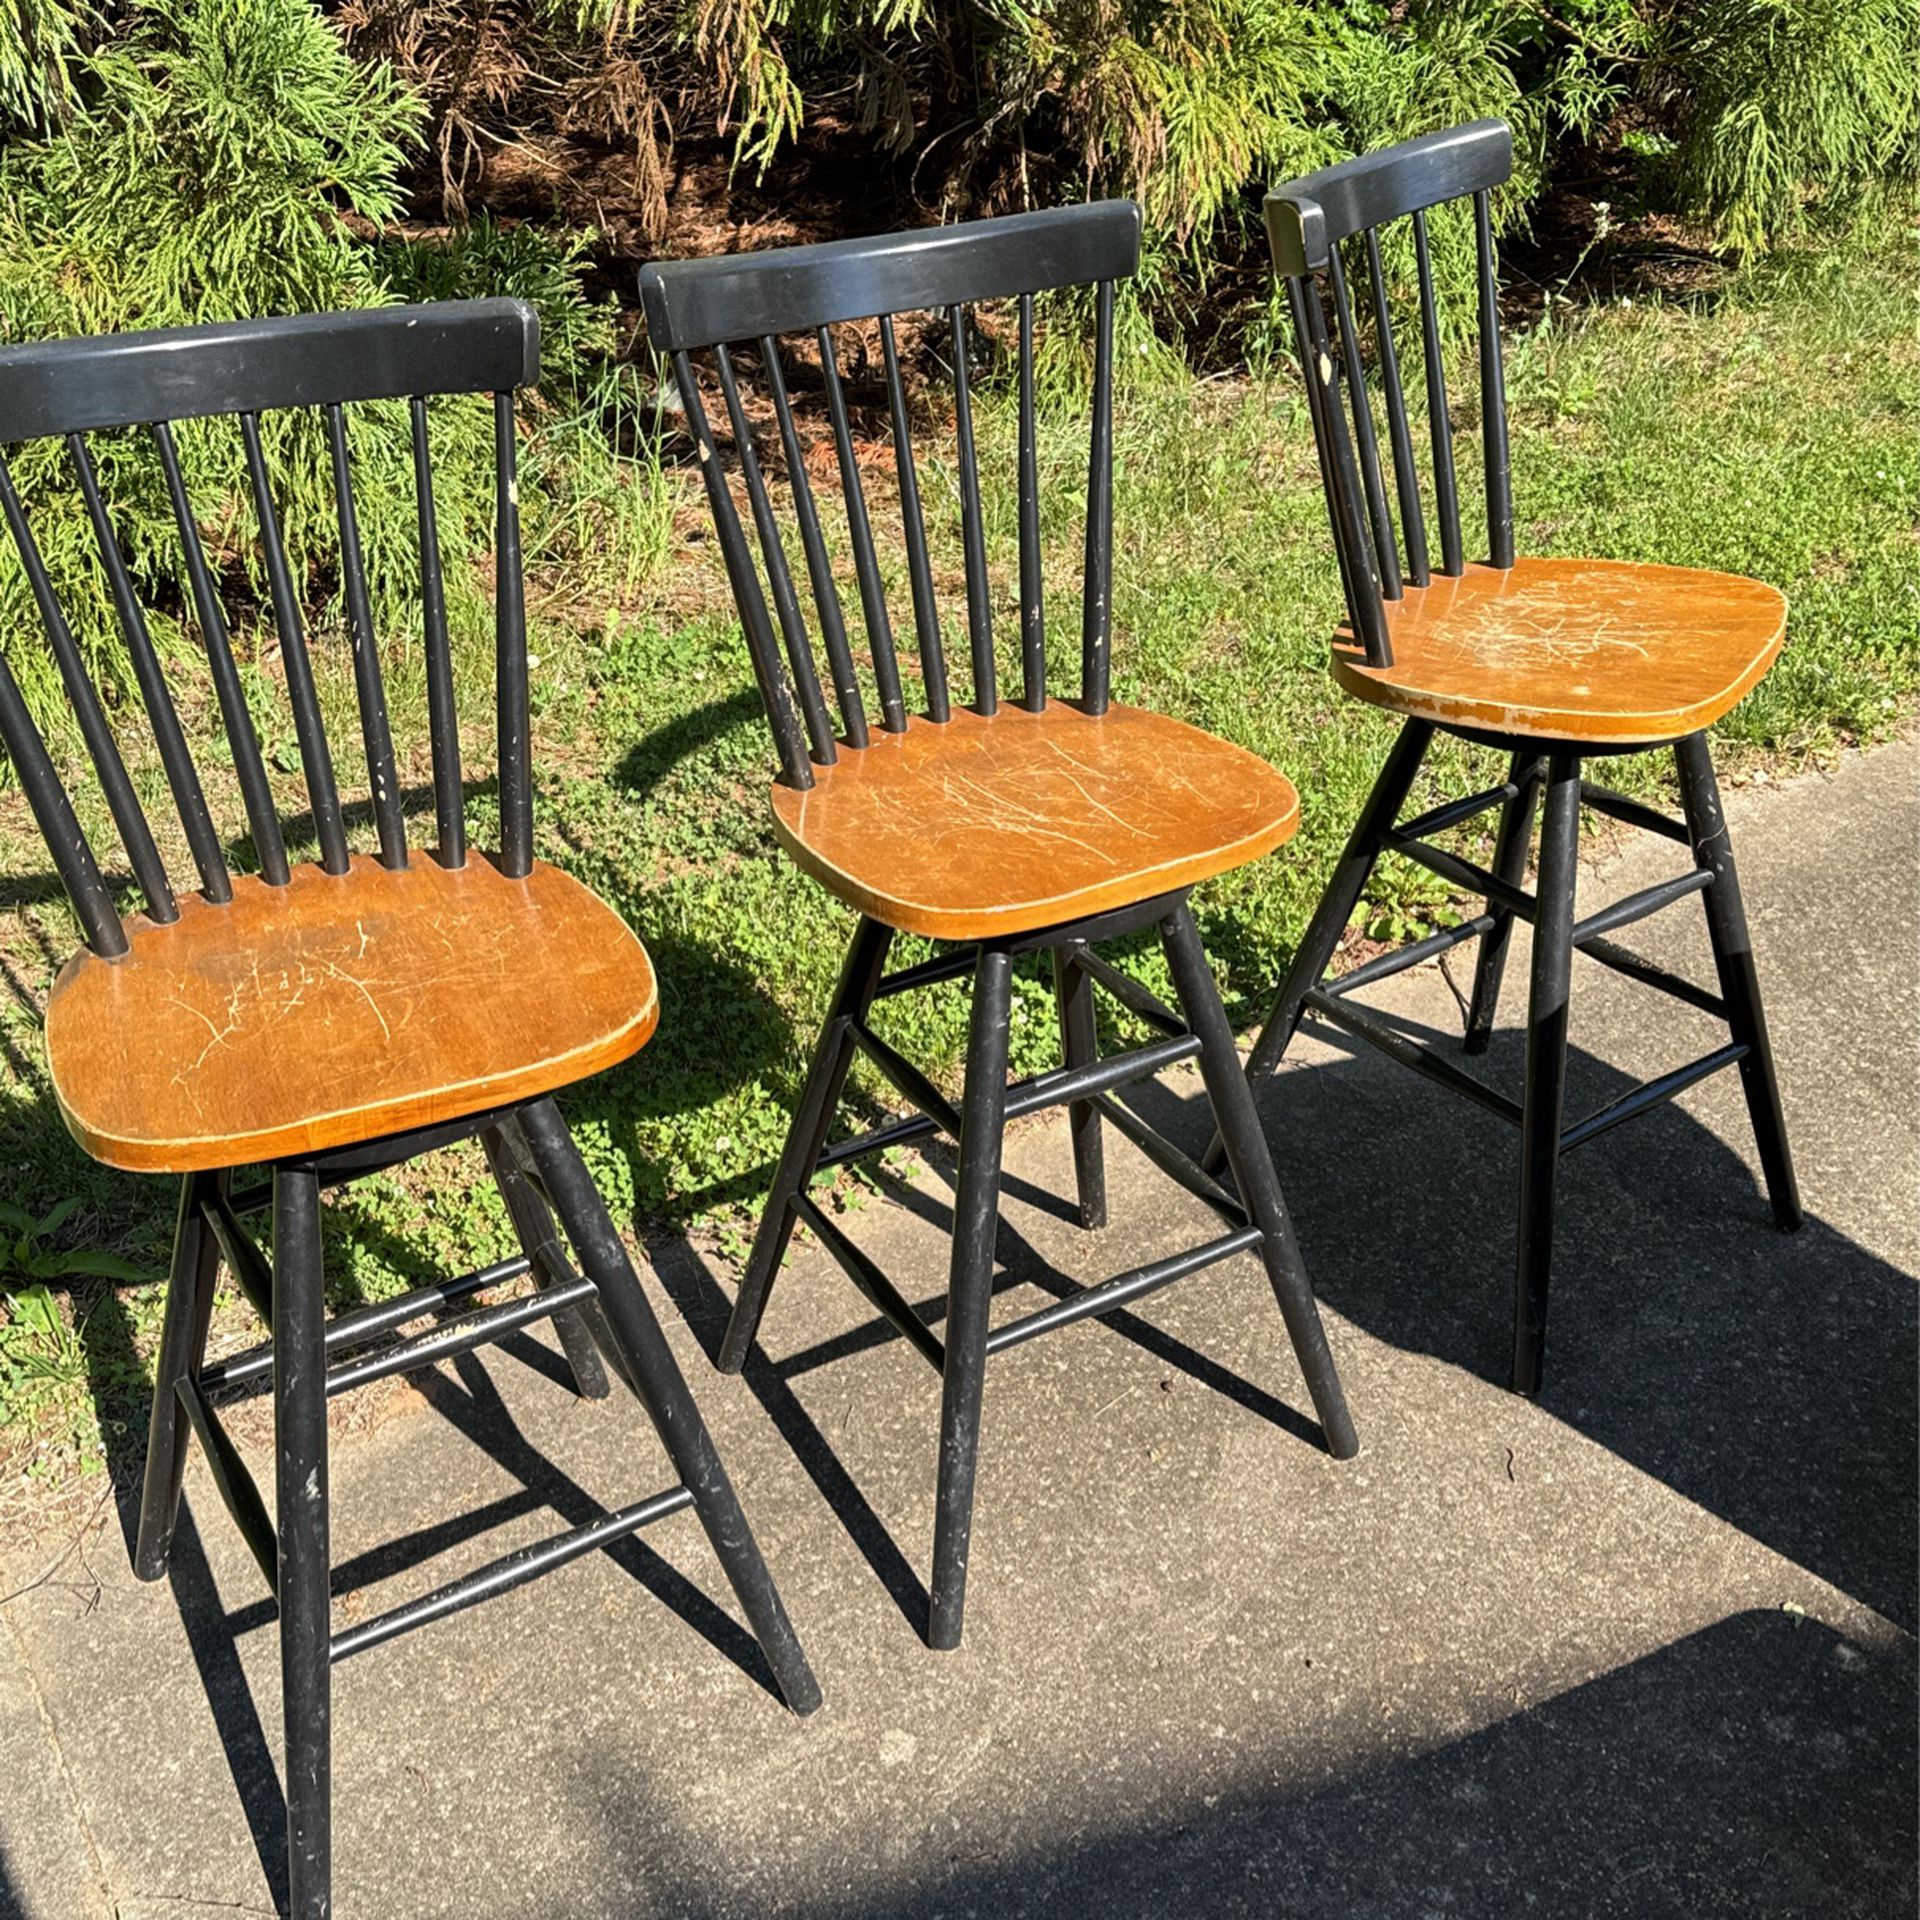 3 bar stool chairs great quality 